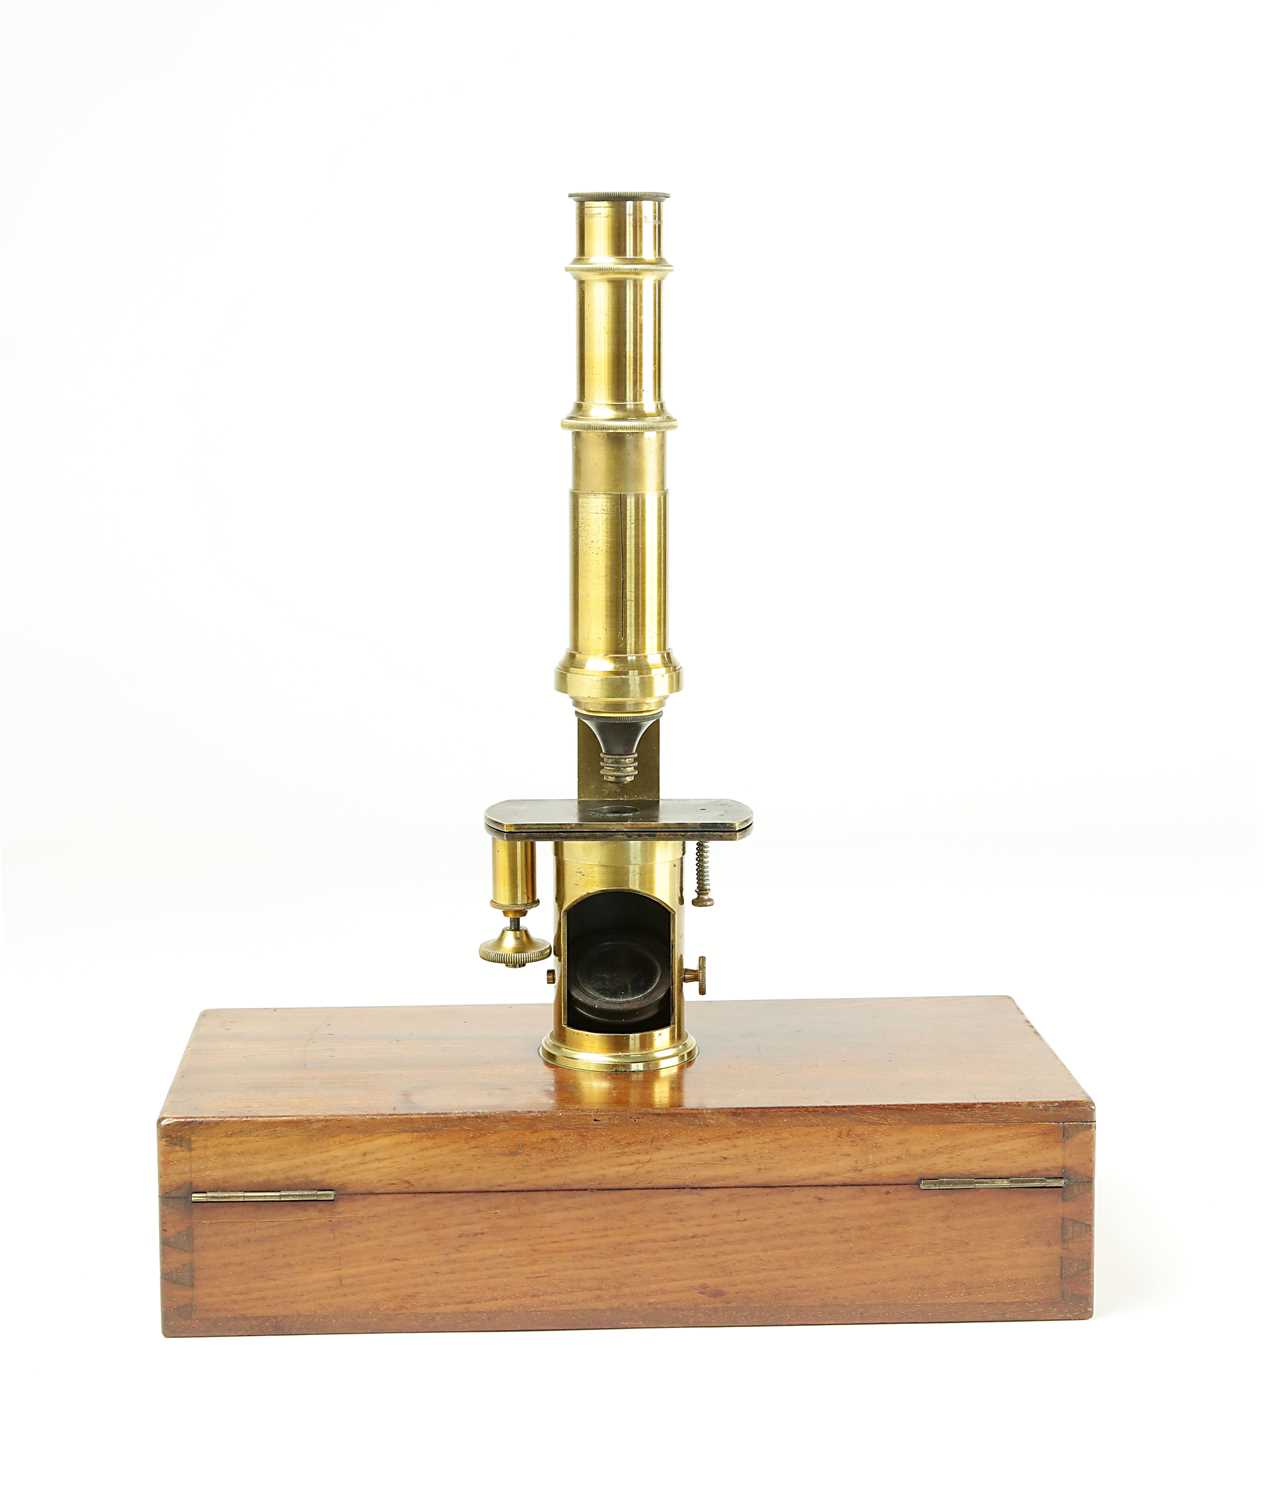 Lot 94 - A Very Rare Signed Drum Microscope, by Pierre Ambroise Richebourg (1810-1873)